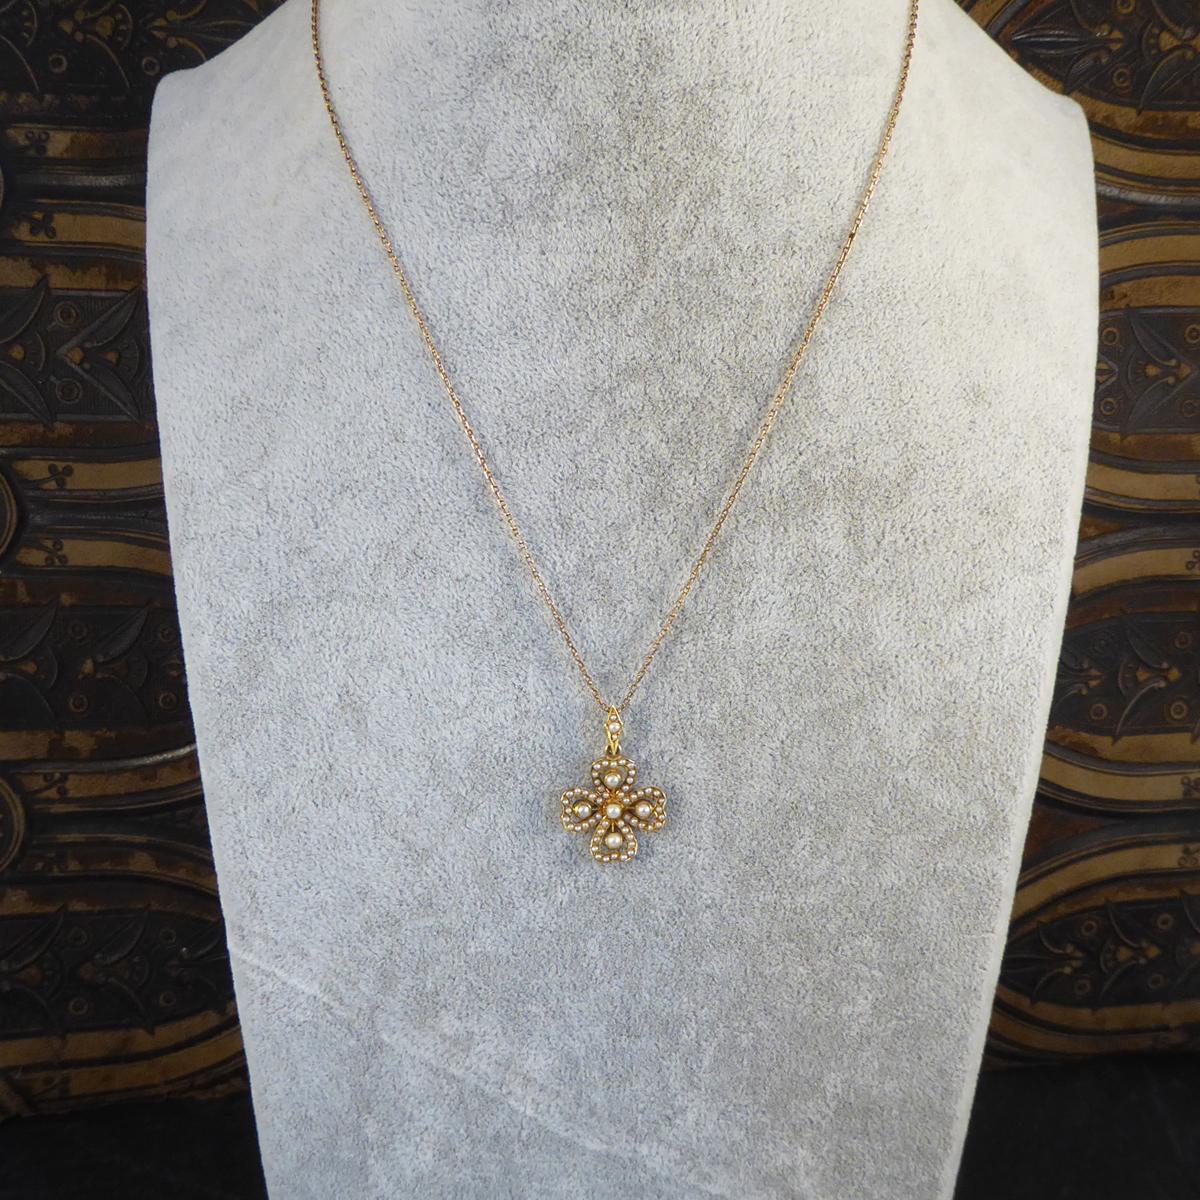 Edwardian Seed Pearl Clover 15 Carat Gold Pendant on 9 Carat Gold Chain 4